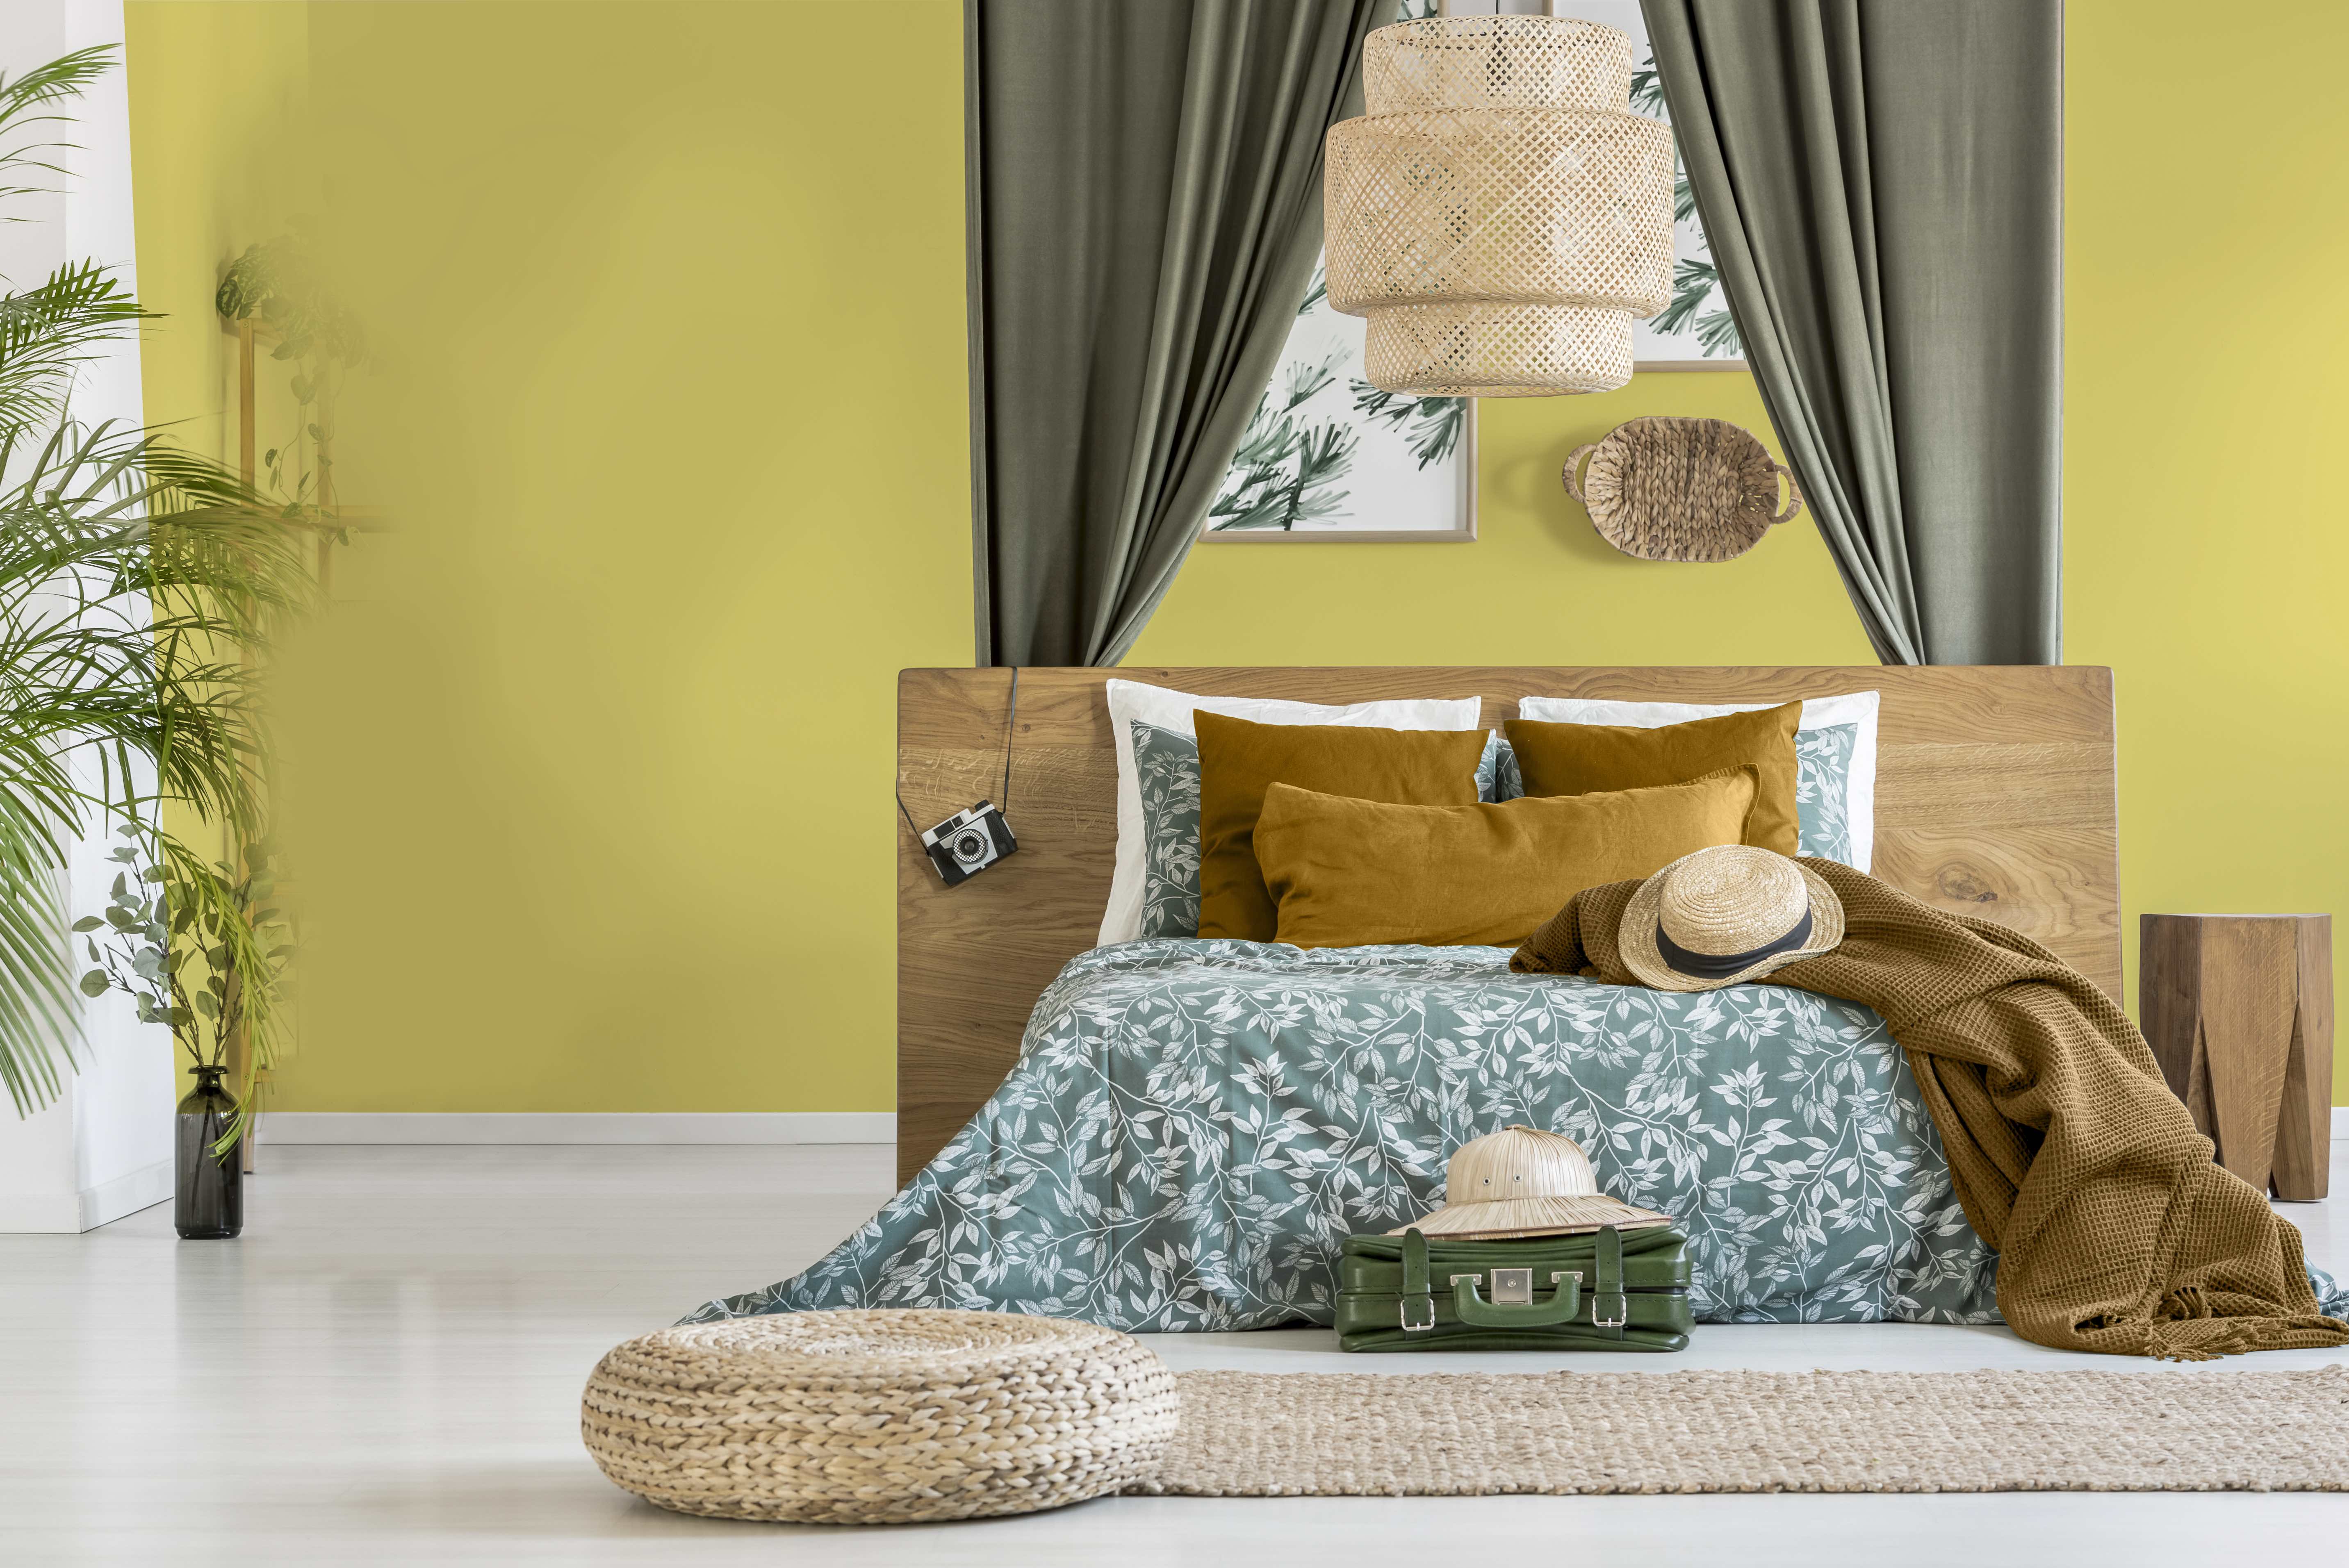 Paint, Pillows, and Perfection in Your New Room - COASTAL HOME & GARDEN